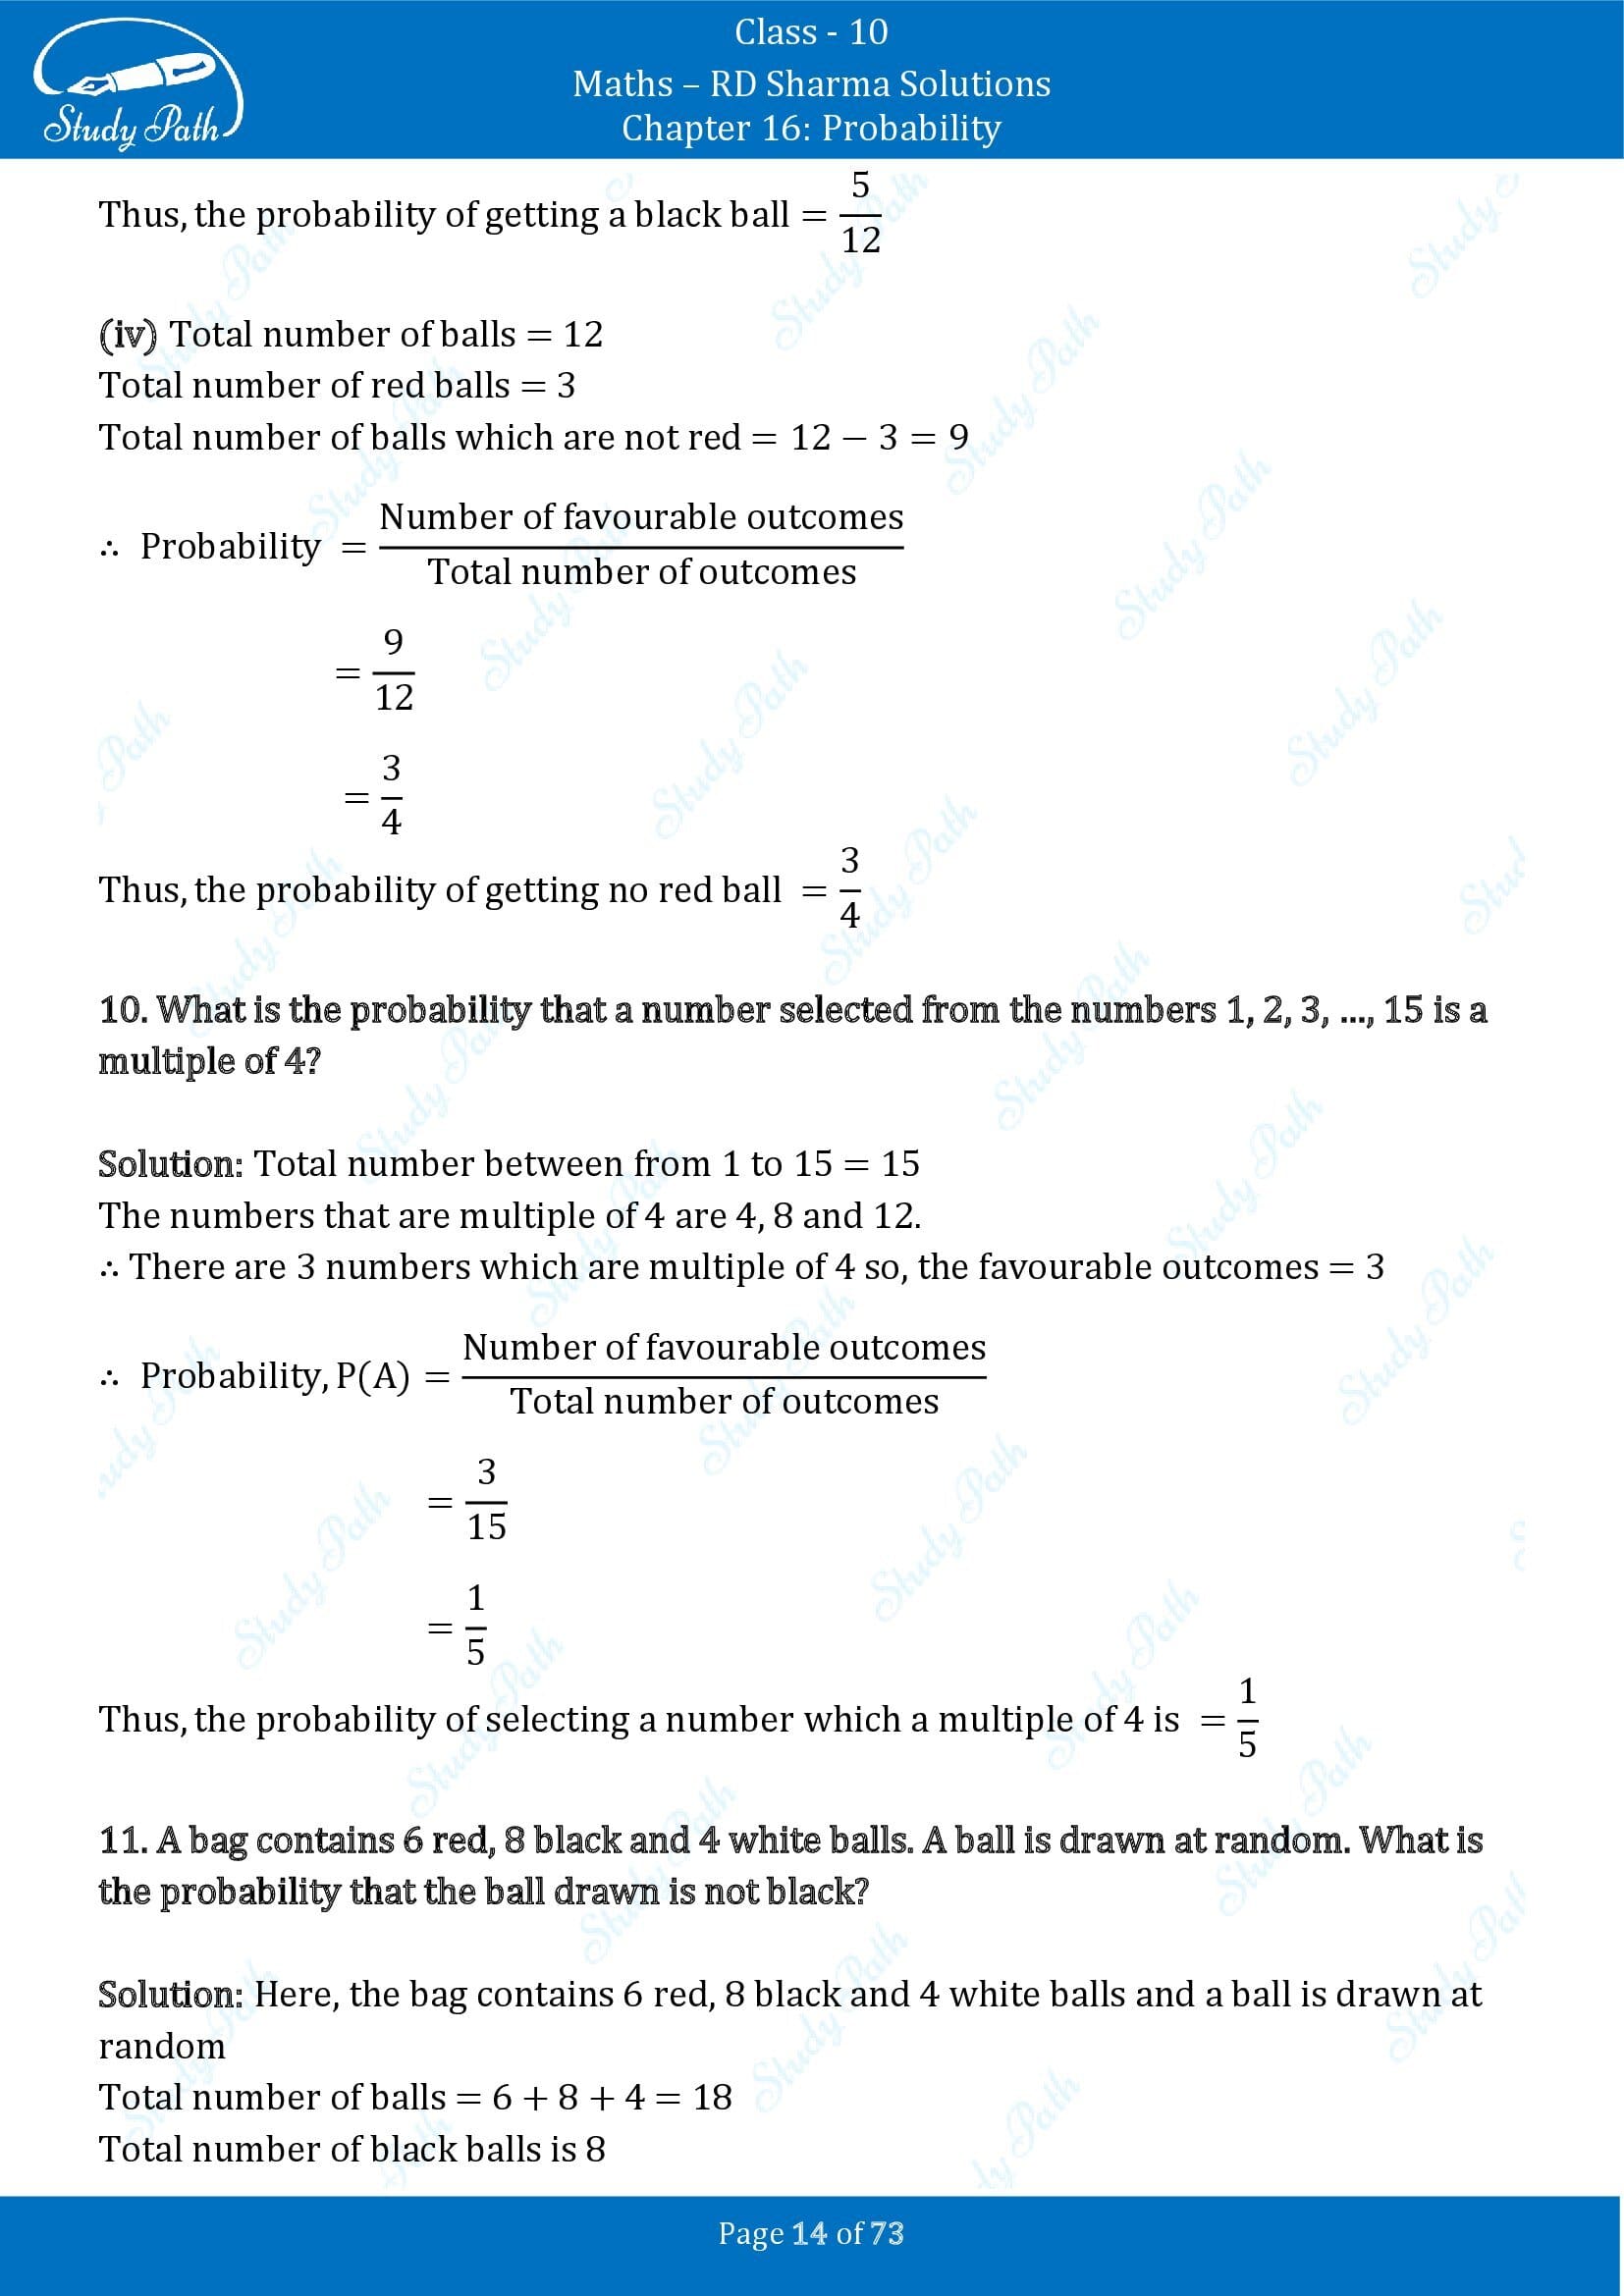 RD Sharma Solutions Class 10 Chapter 16 Probability Exercise 16.1 00014